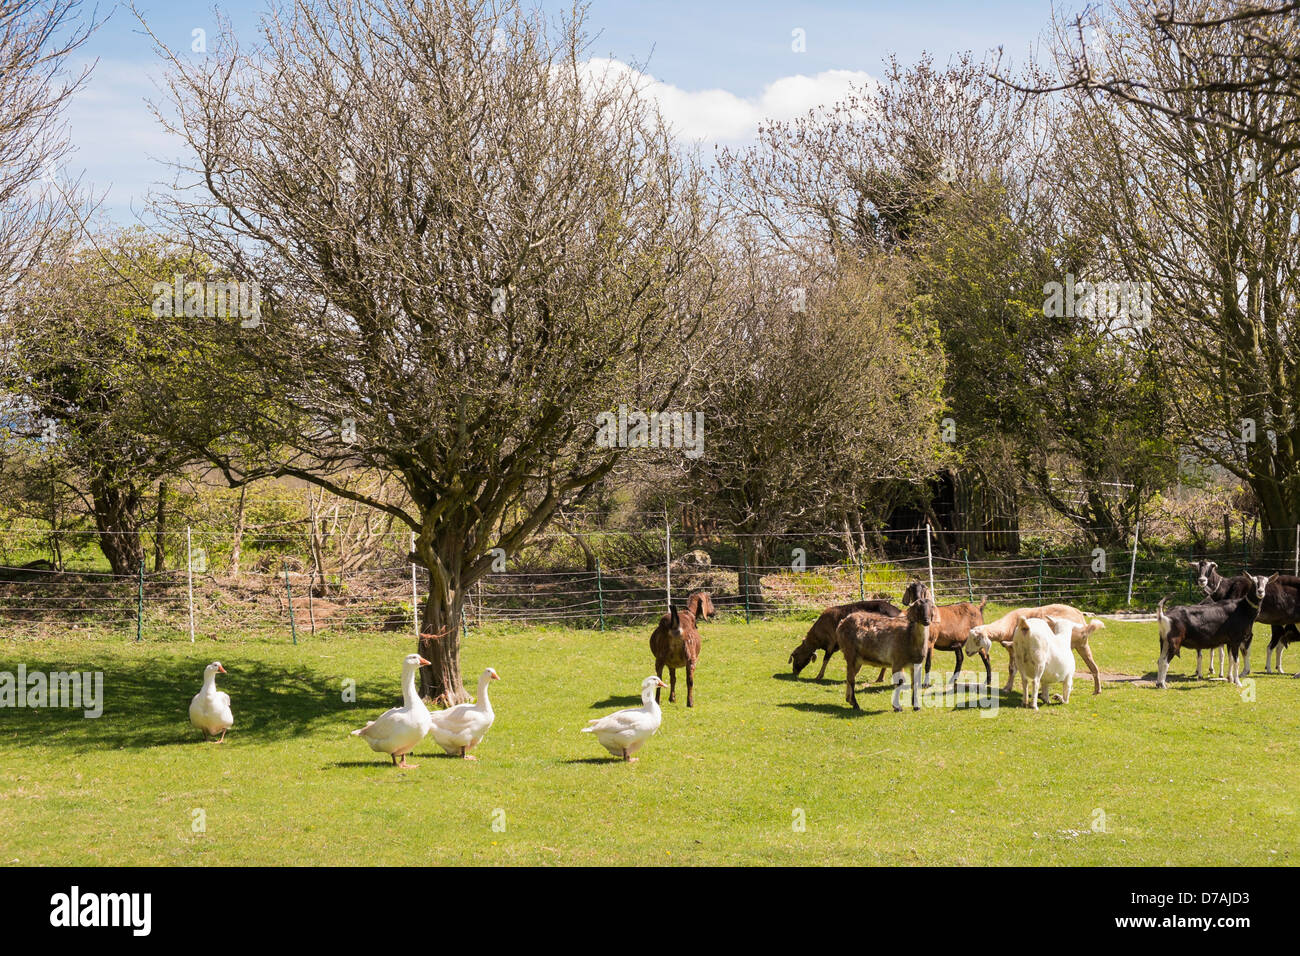 Geese and goats in a field on a smallholding. UK, Britain Stock Photo